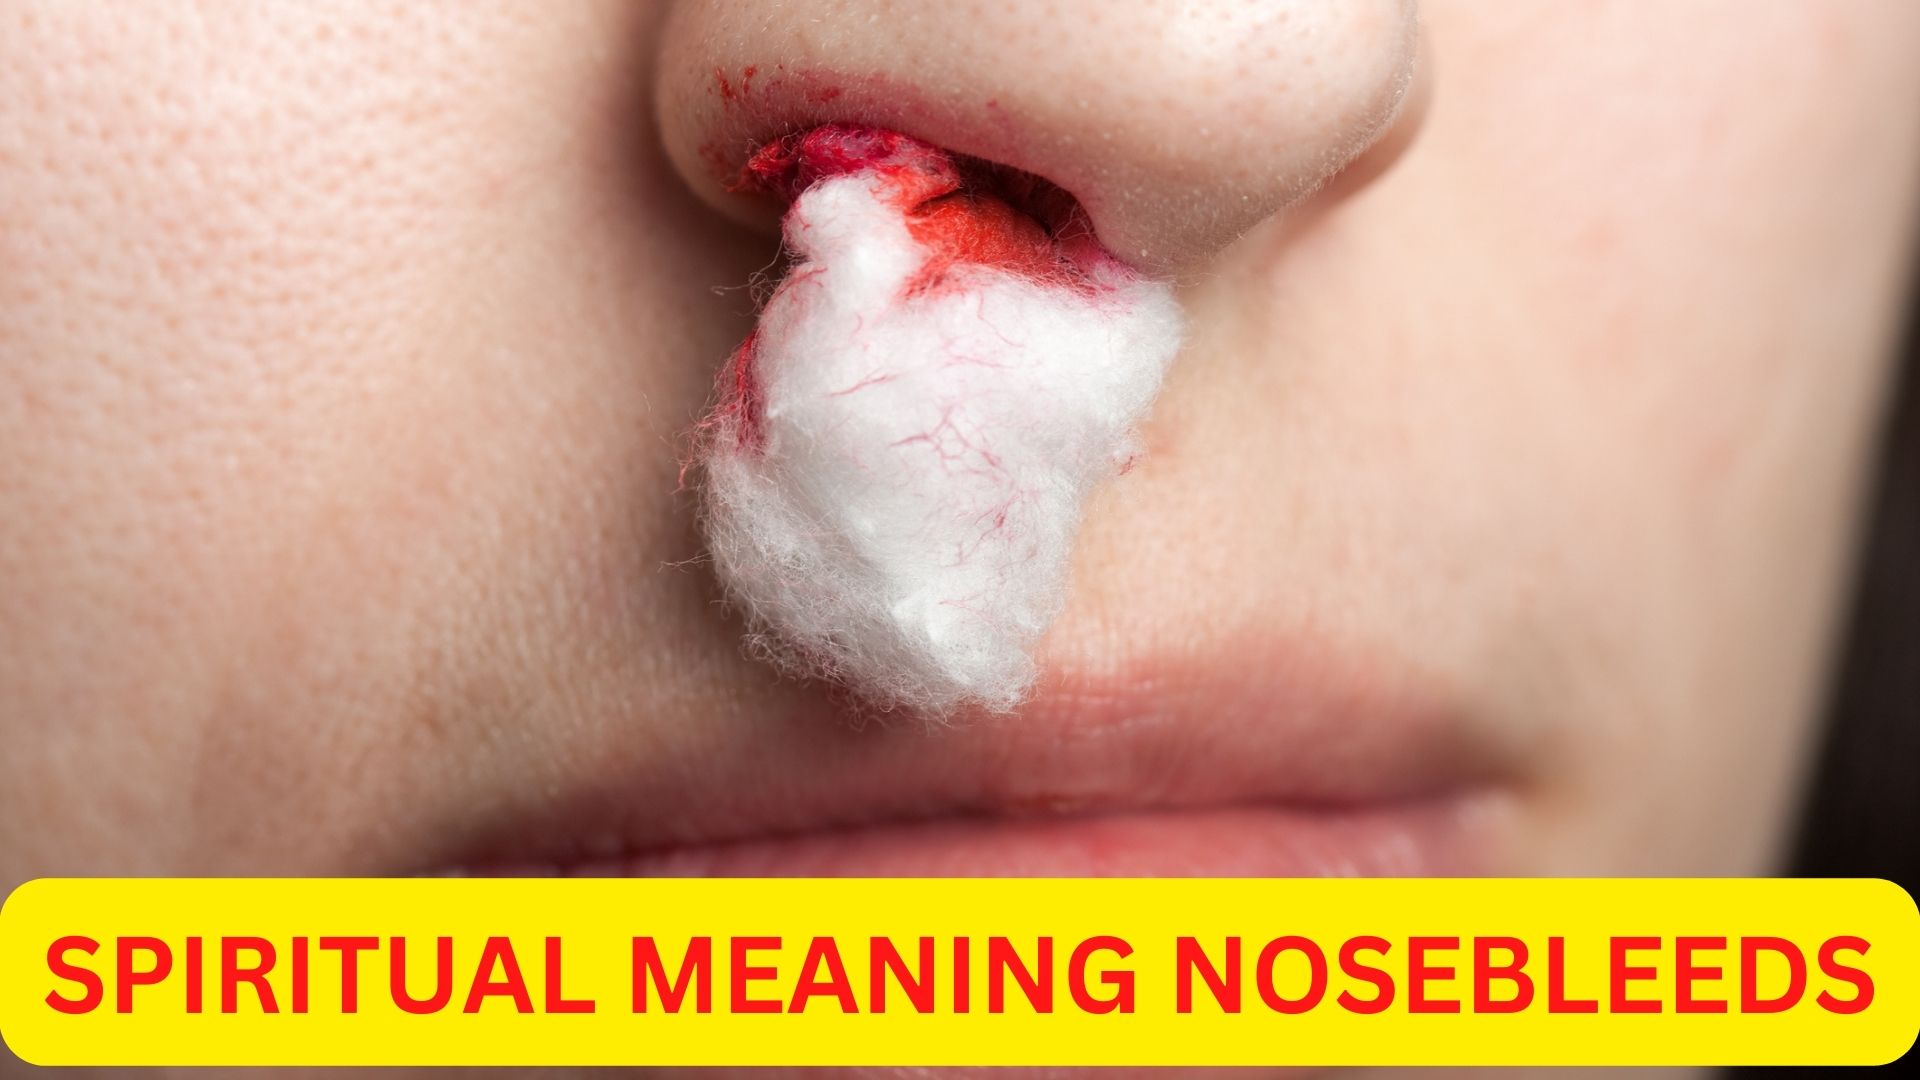 Spiritual Meaning Nosebleeds - A Lack Of Self-Control